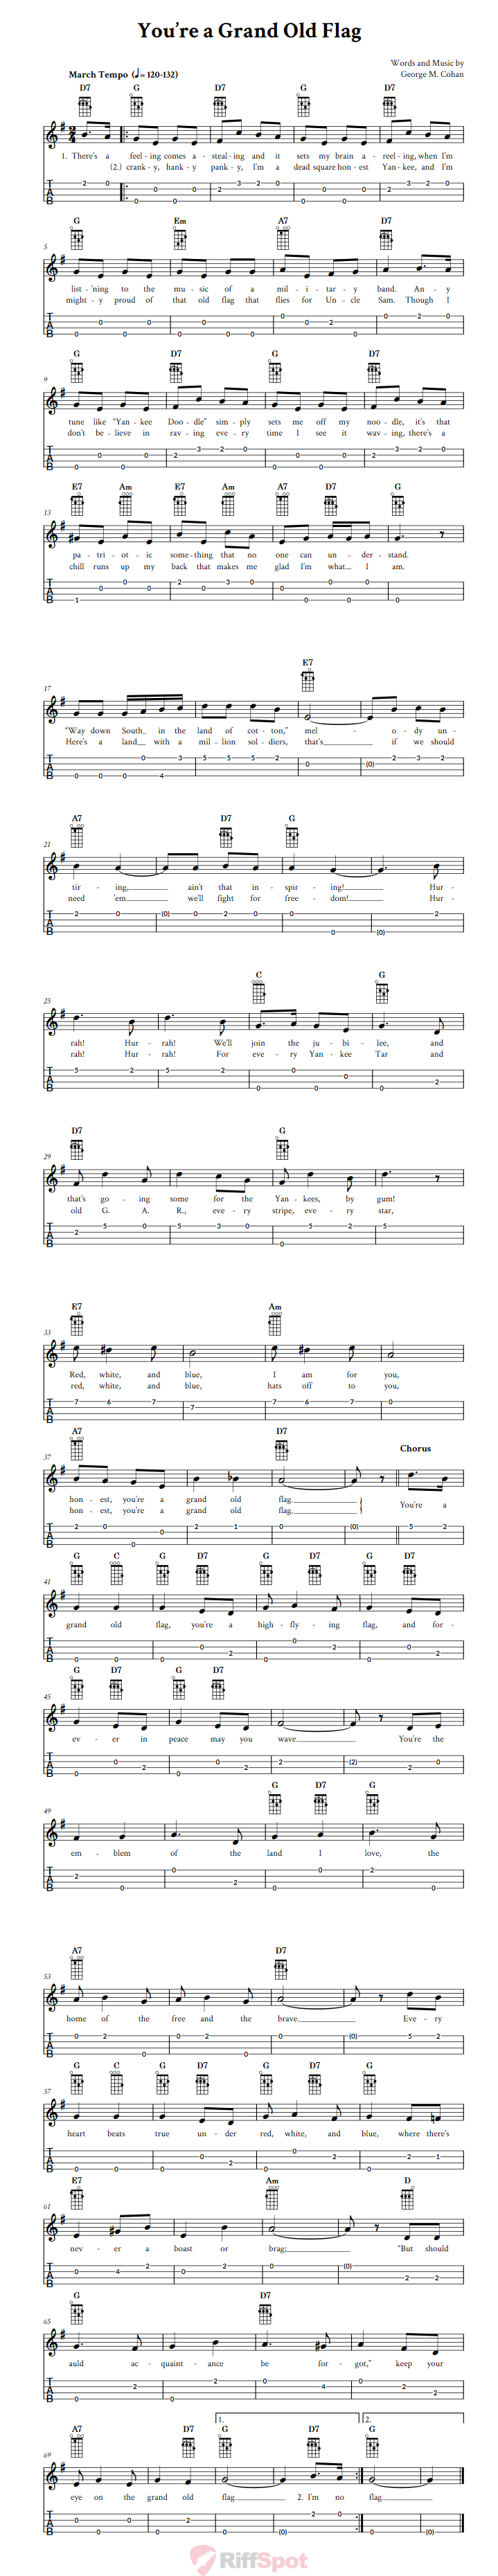 You're a Grand Old Flag Chords, Sheet Music and Tab for Ukulele with